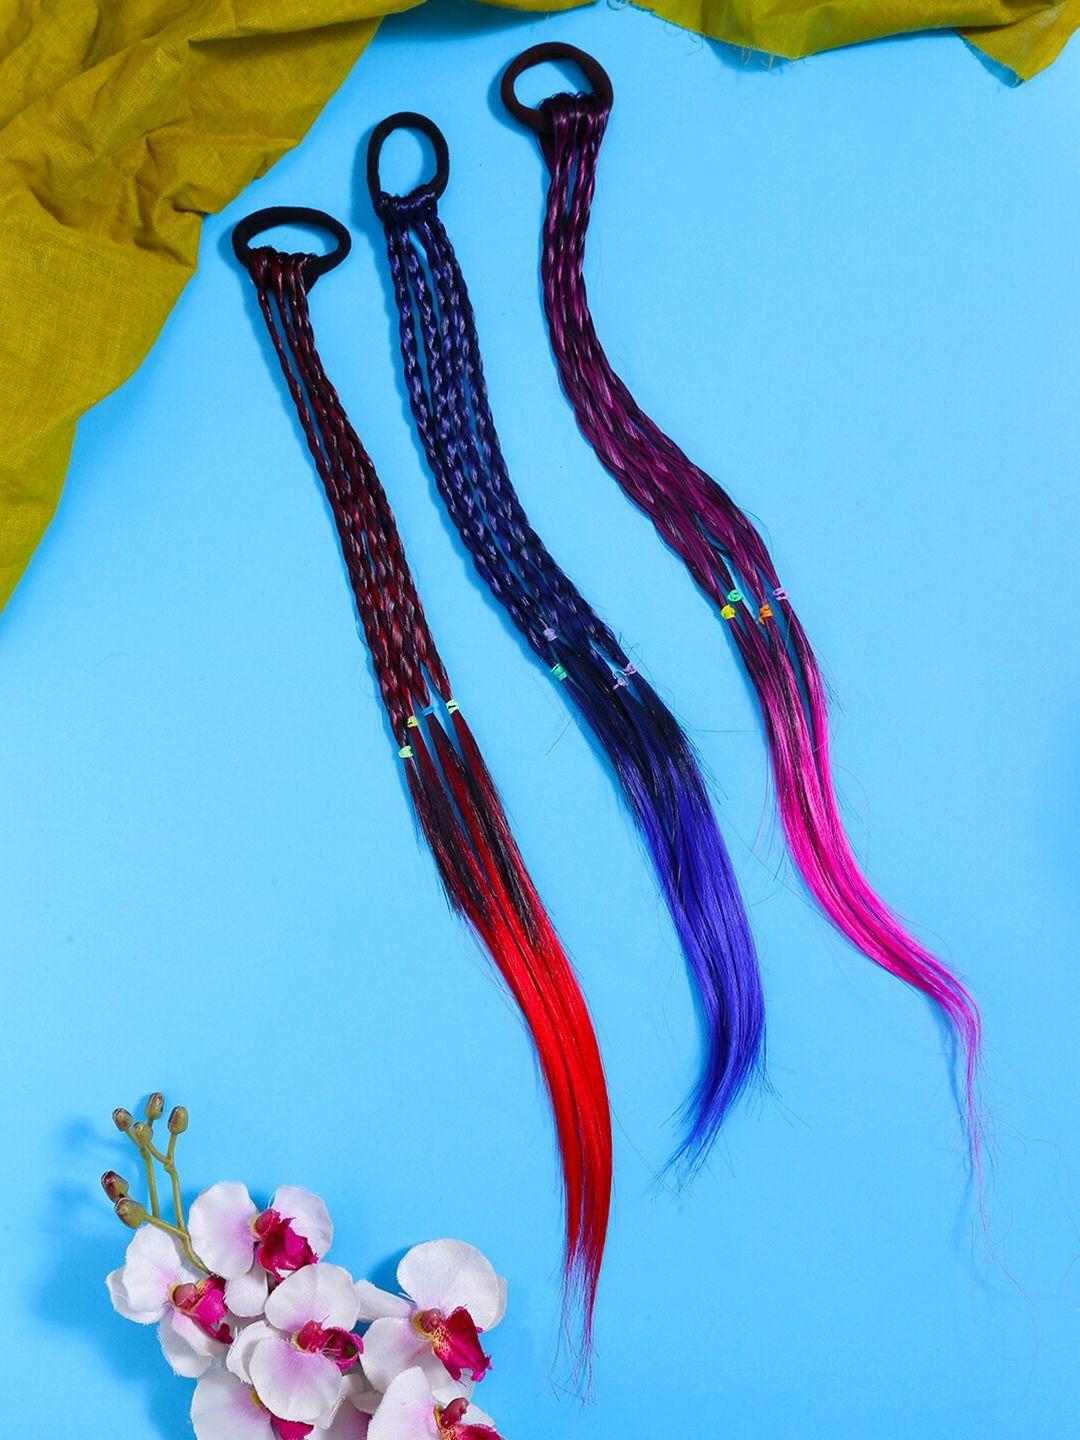 yellow chimes girls black & blue set of 3 artificial colorful hair hangings